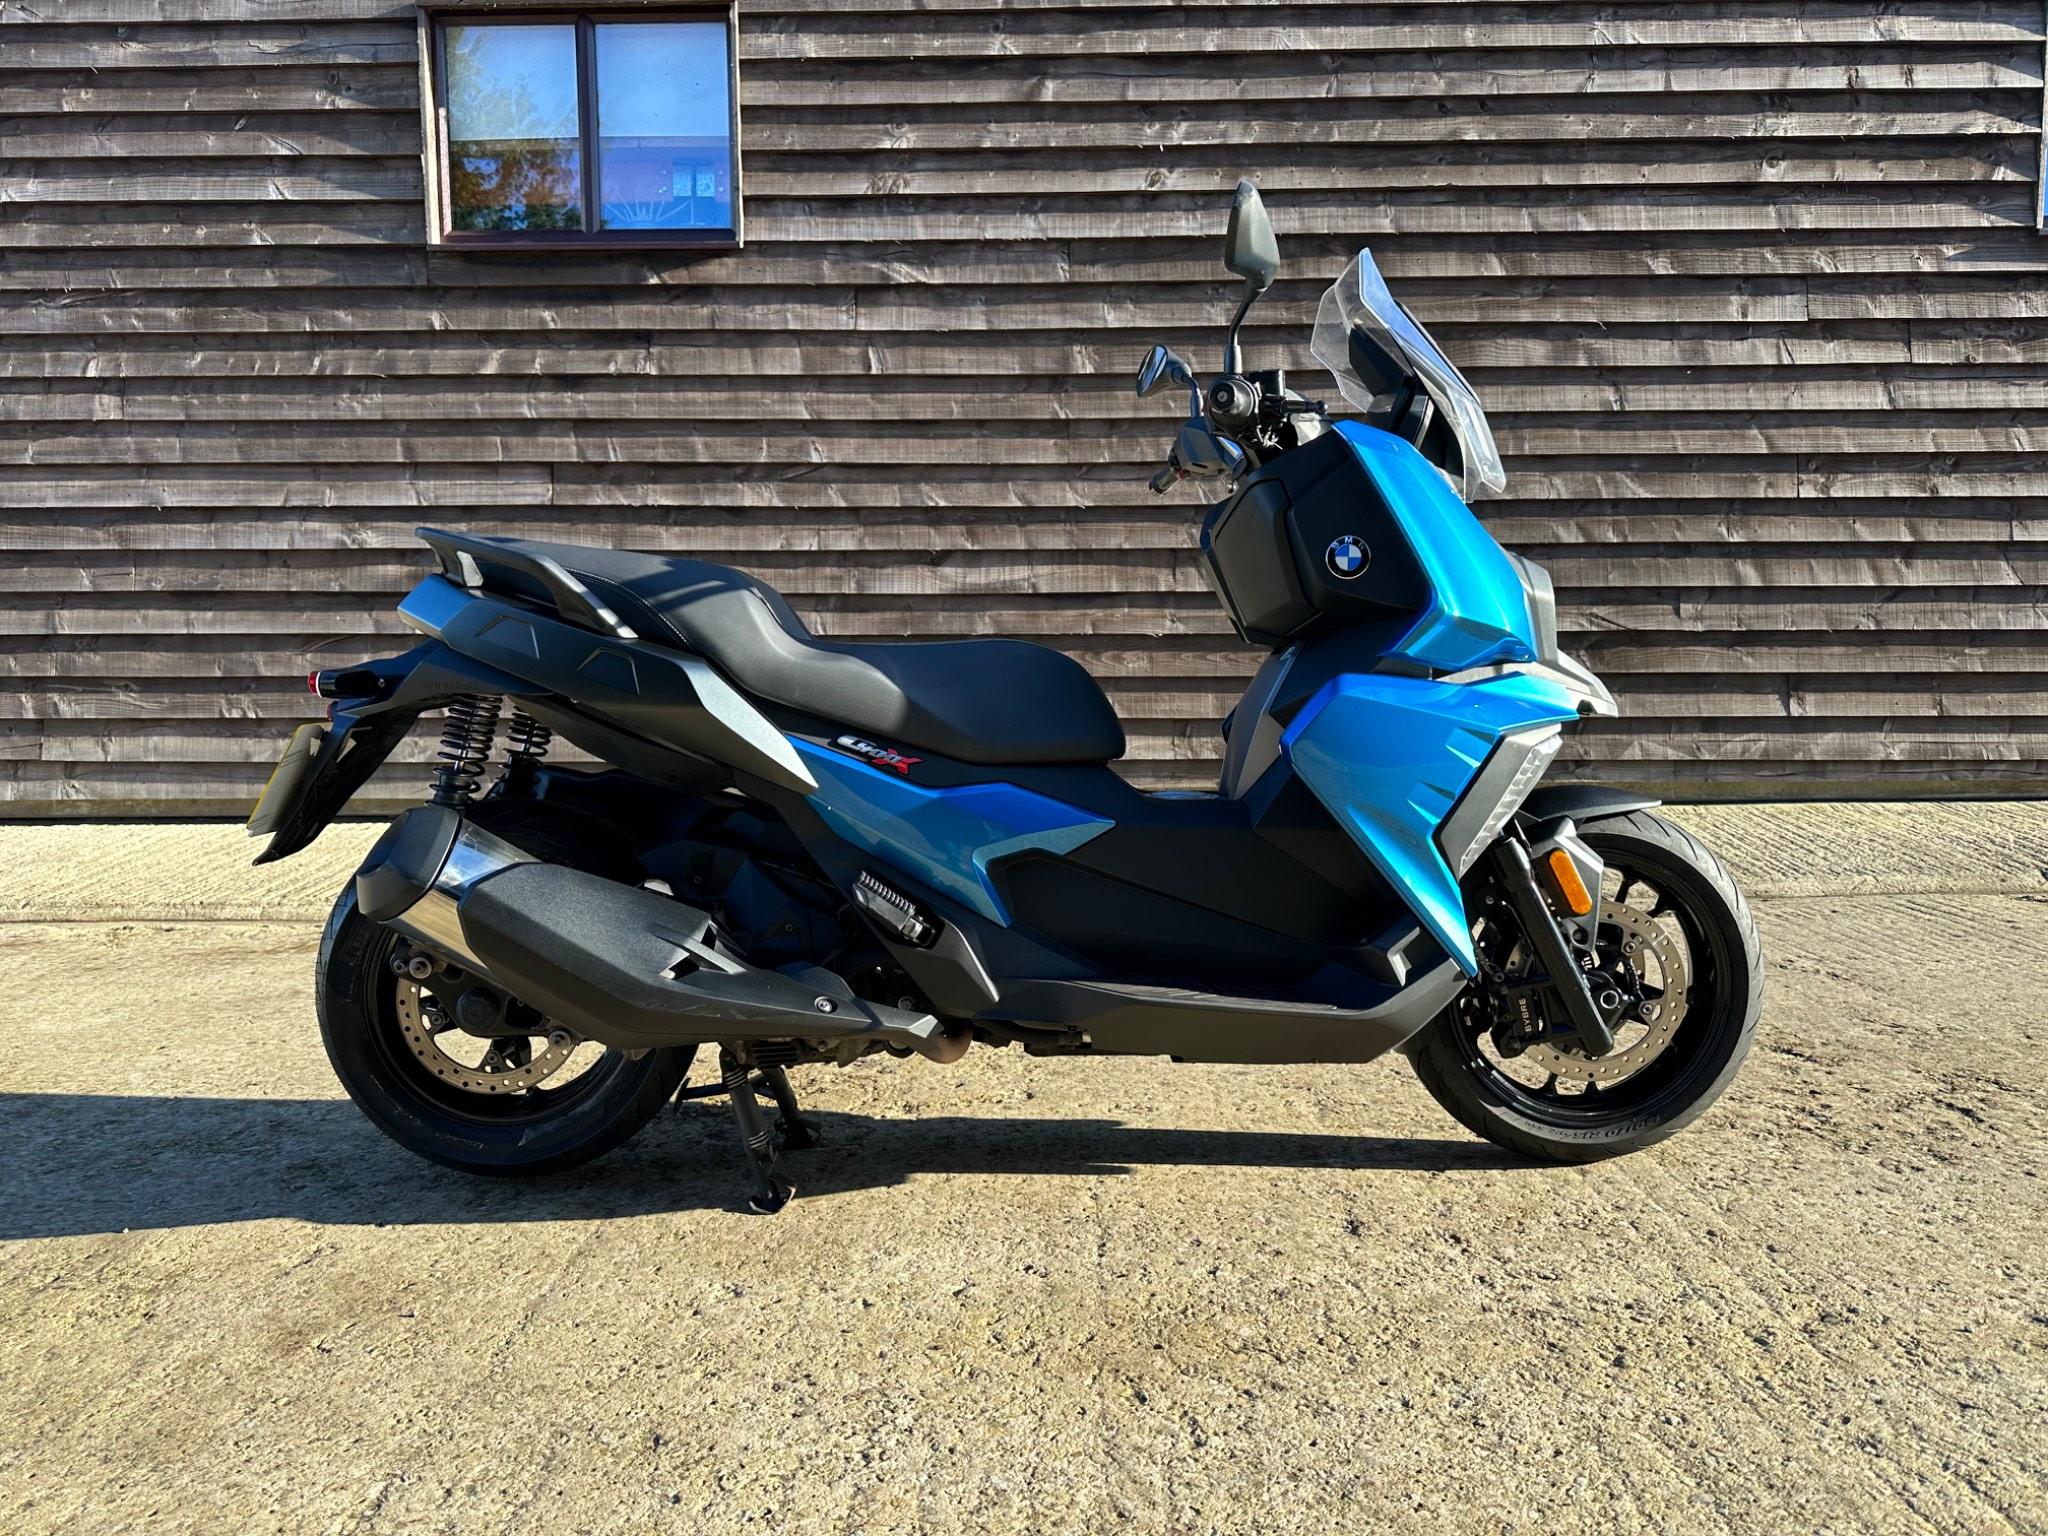 2020 BMW C400 400 X SE ABS From £70.38 per month 